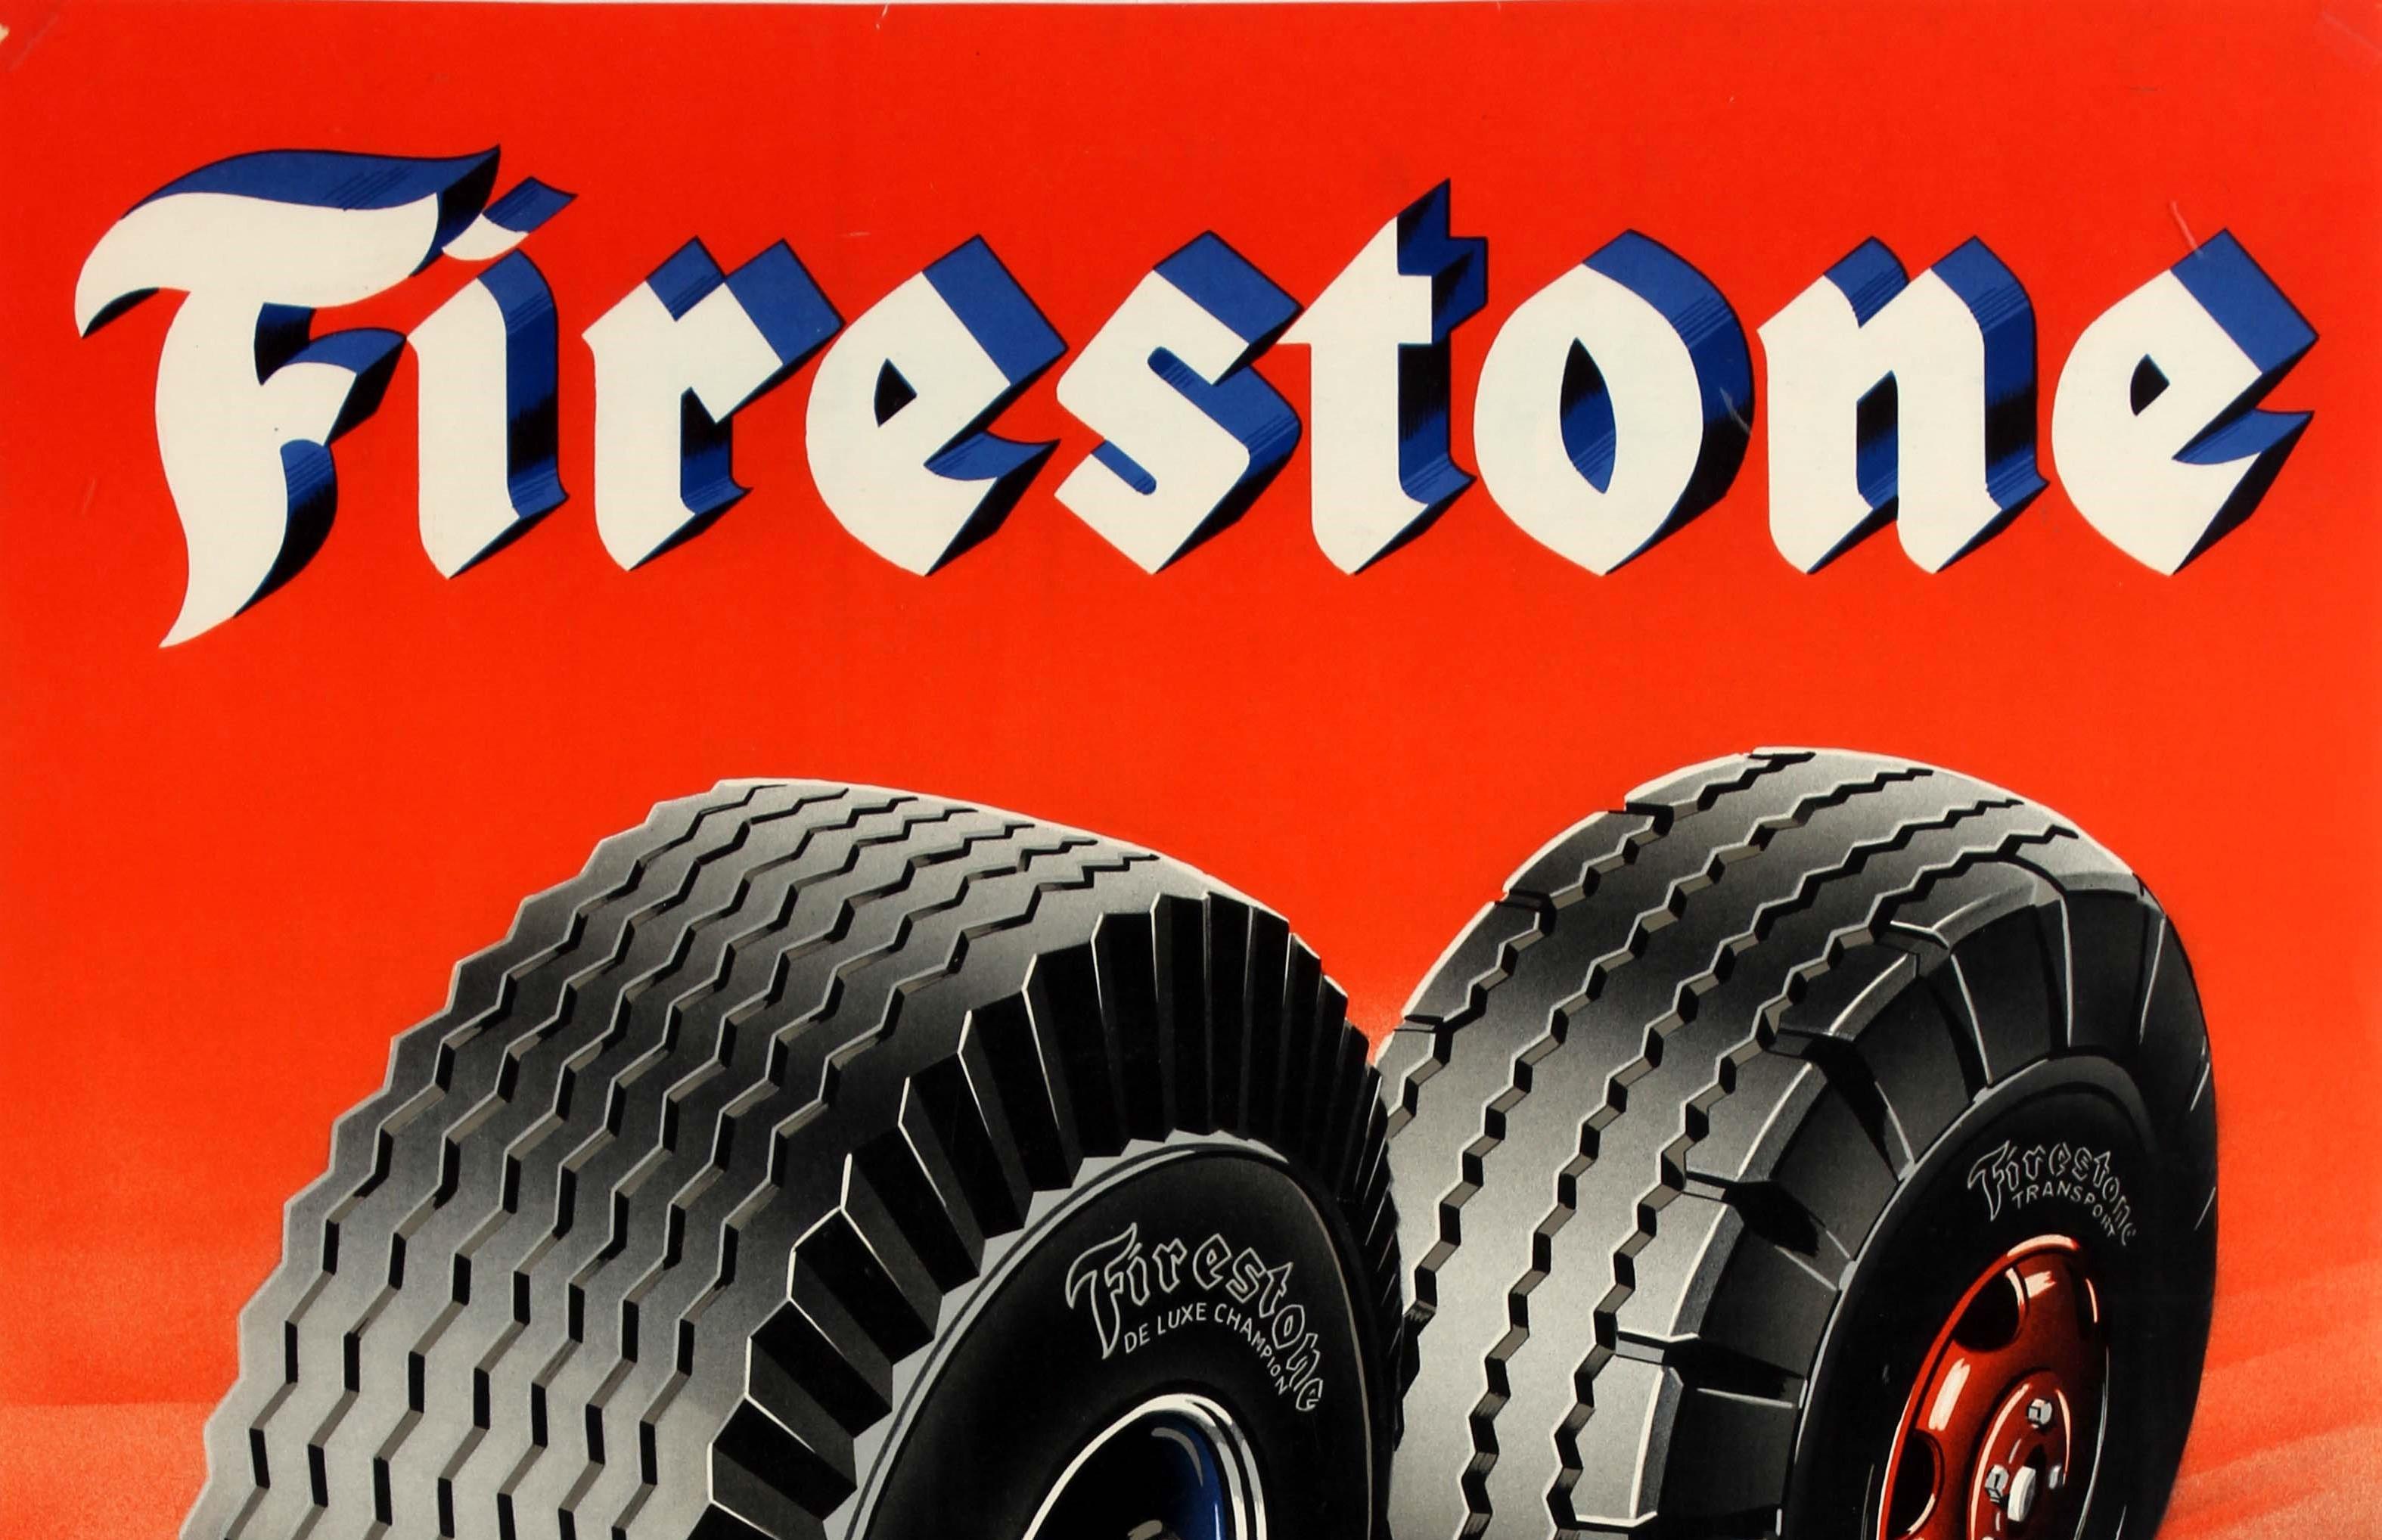 Original vintage advertising poster in Danish for the American tire company Firestone - Most kilometers per Krone. Great design by the illustrator Aage Lippert (1894-1969) depicting a blue car and red truck driving on a road at speed with larger